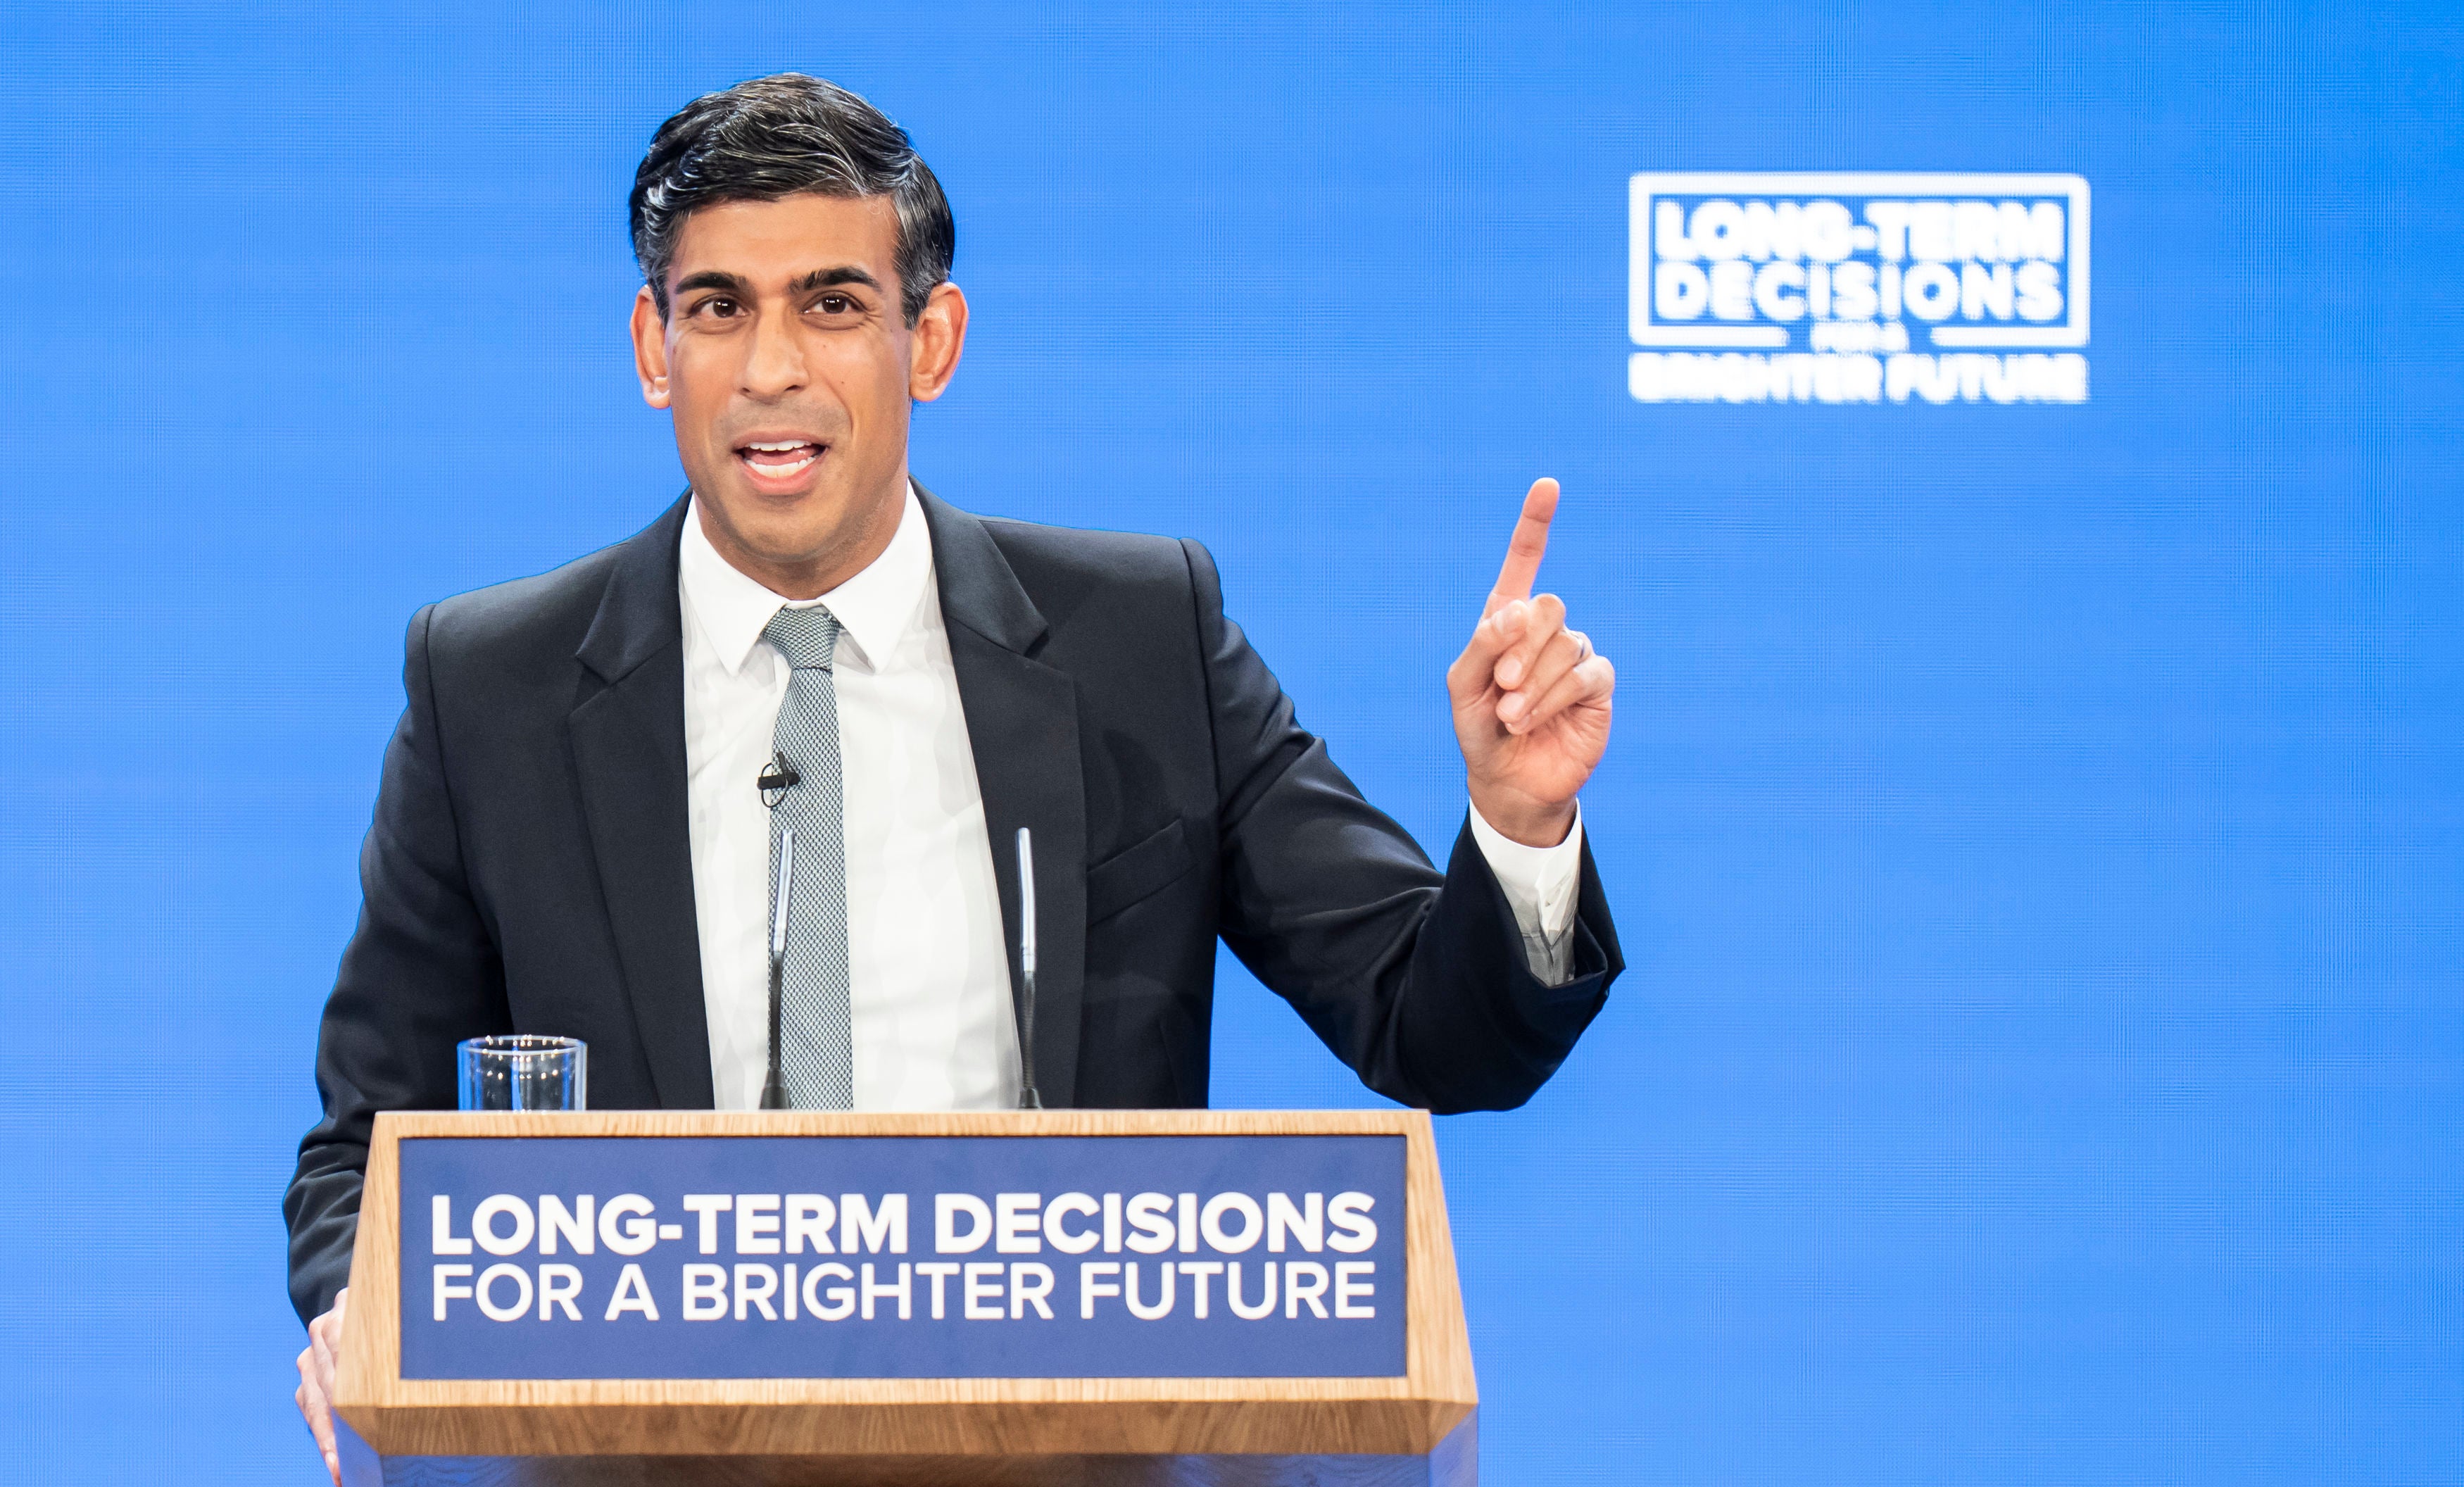 Rishi Sunak announced plans to phase out smoking at the Tory conference